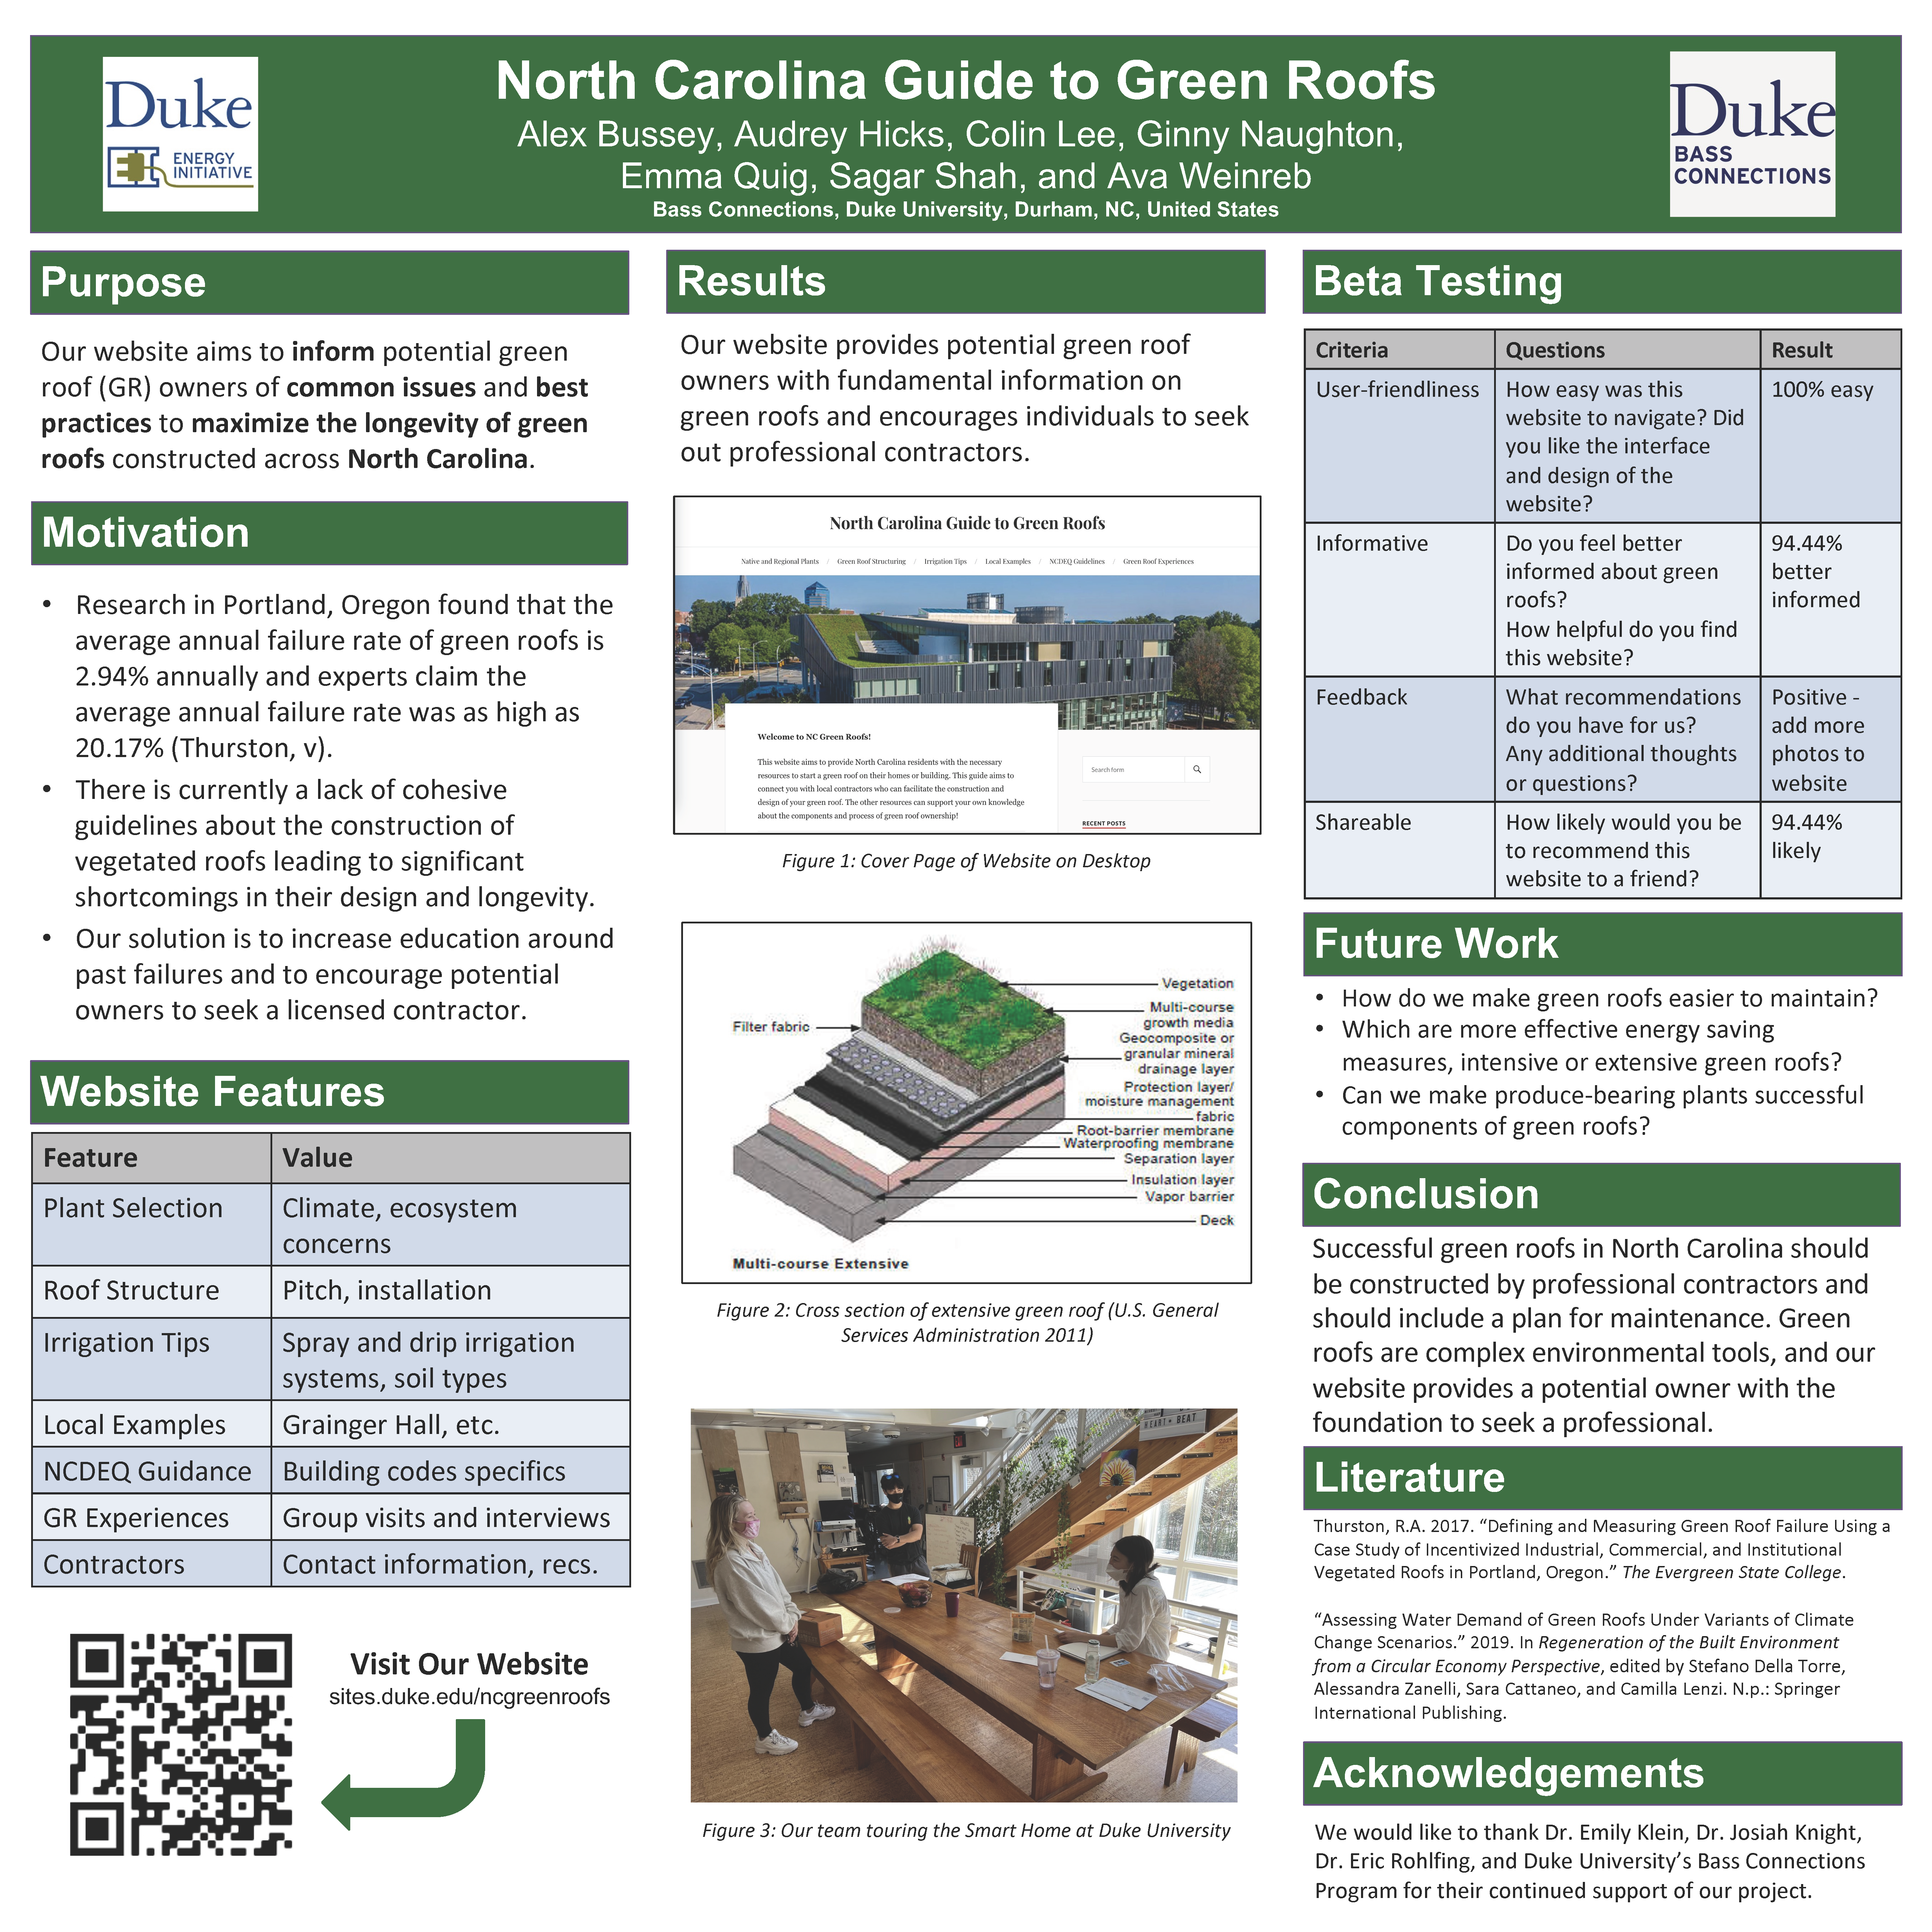 North Carolina Guide to Green Roofs poster.